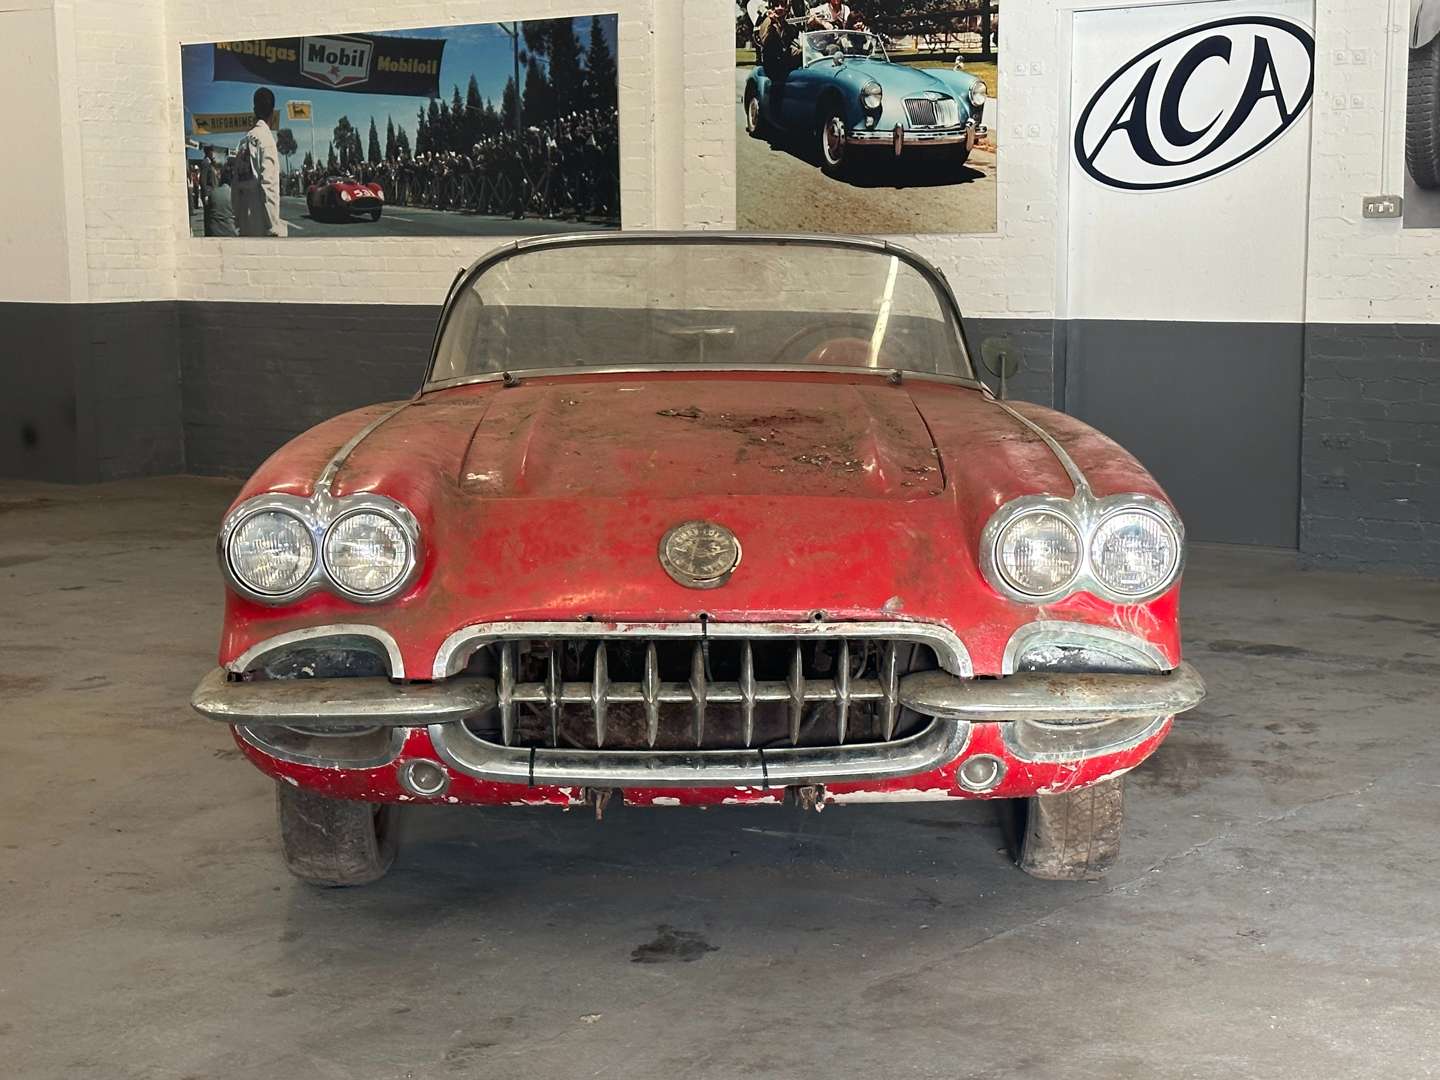 <p>1959 CHEVROLET CORVETTE C1 LHD From the Scottish collection</p>